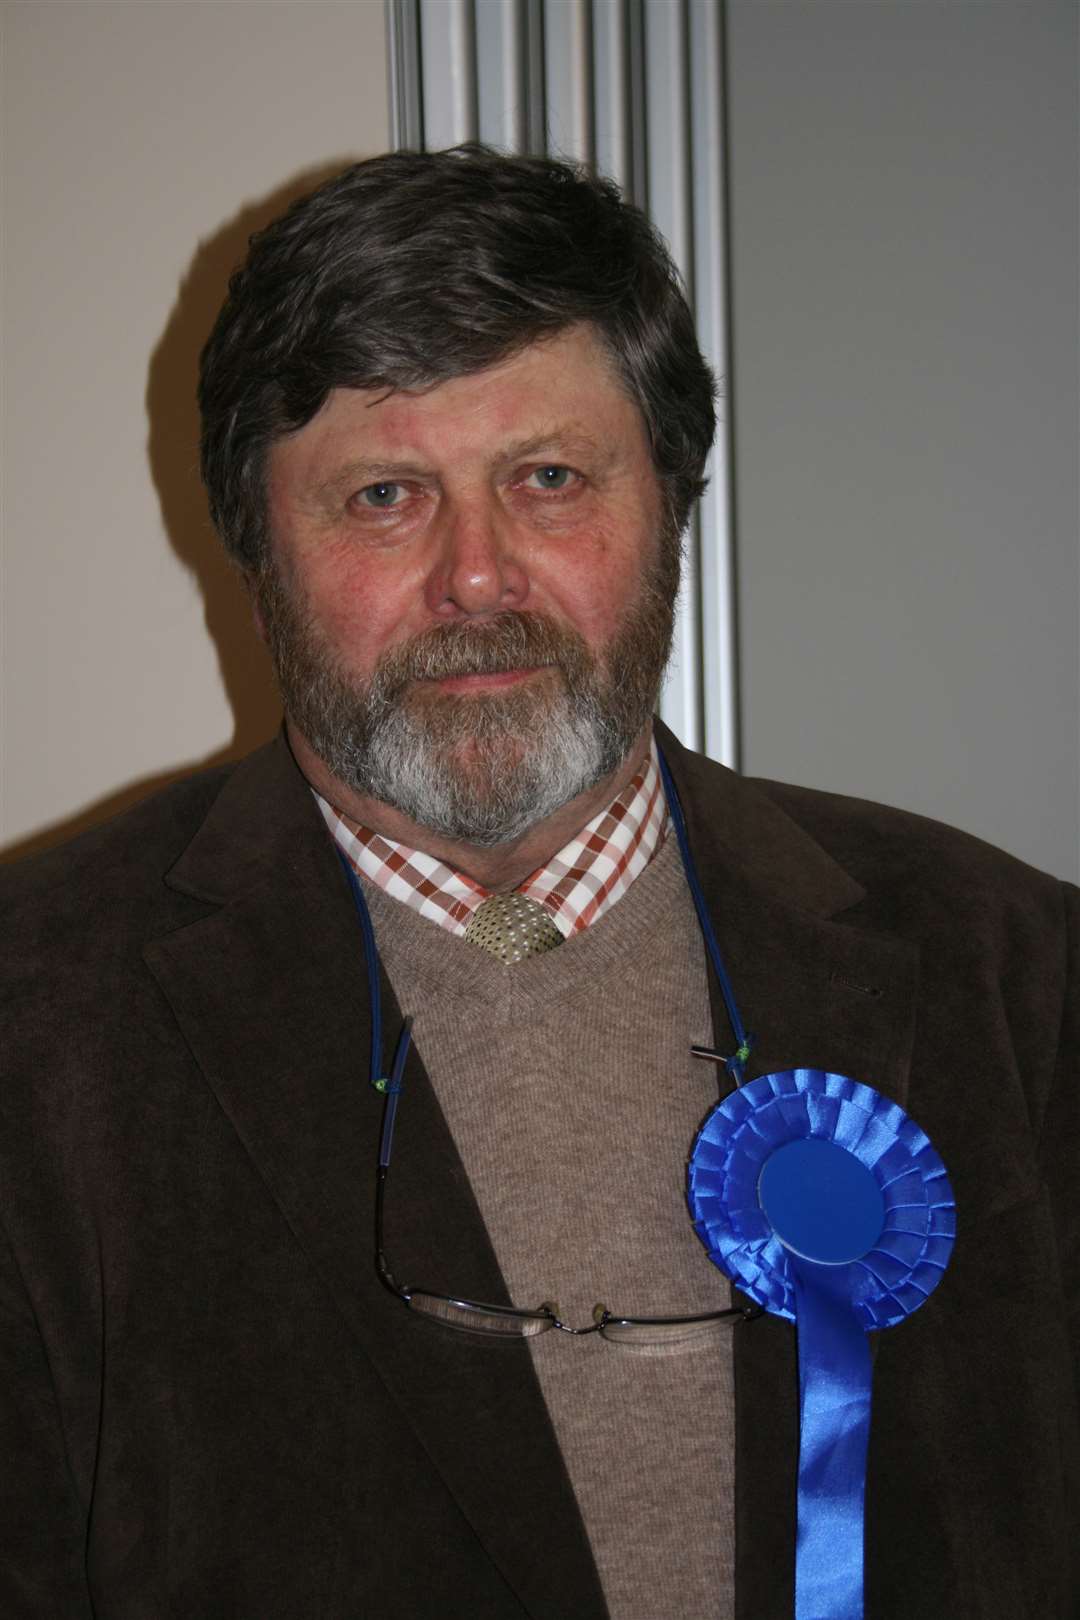 Former Shepway District Councillor, Tony Hills